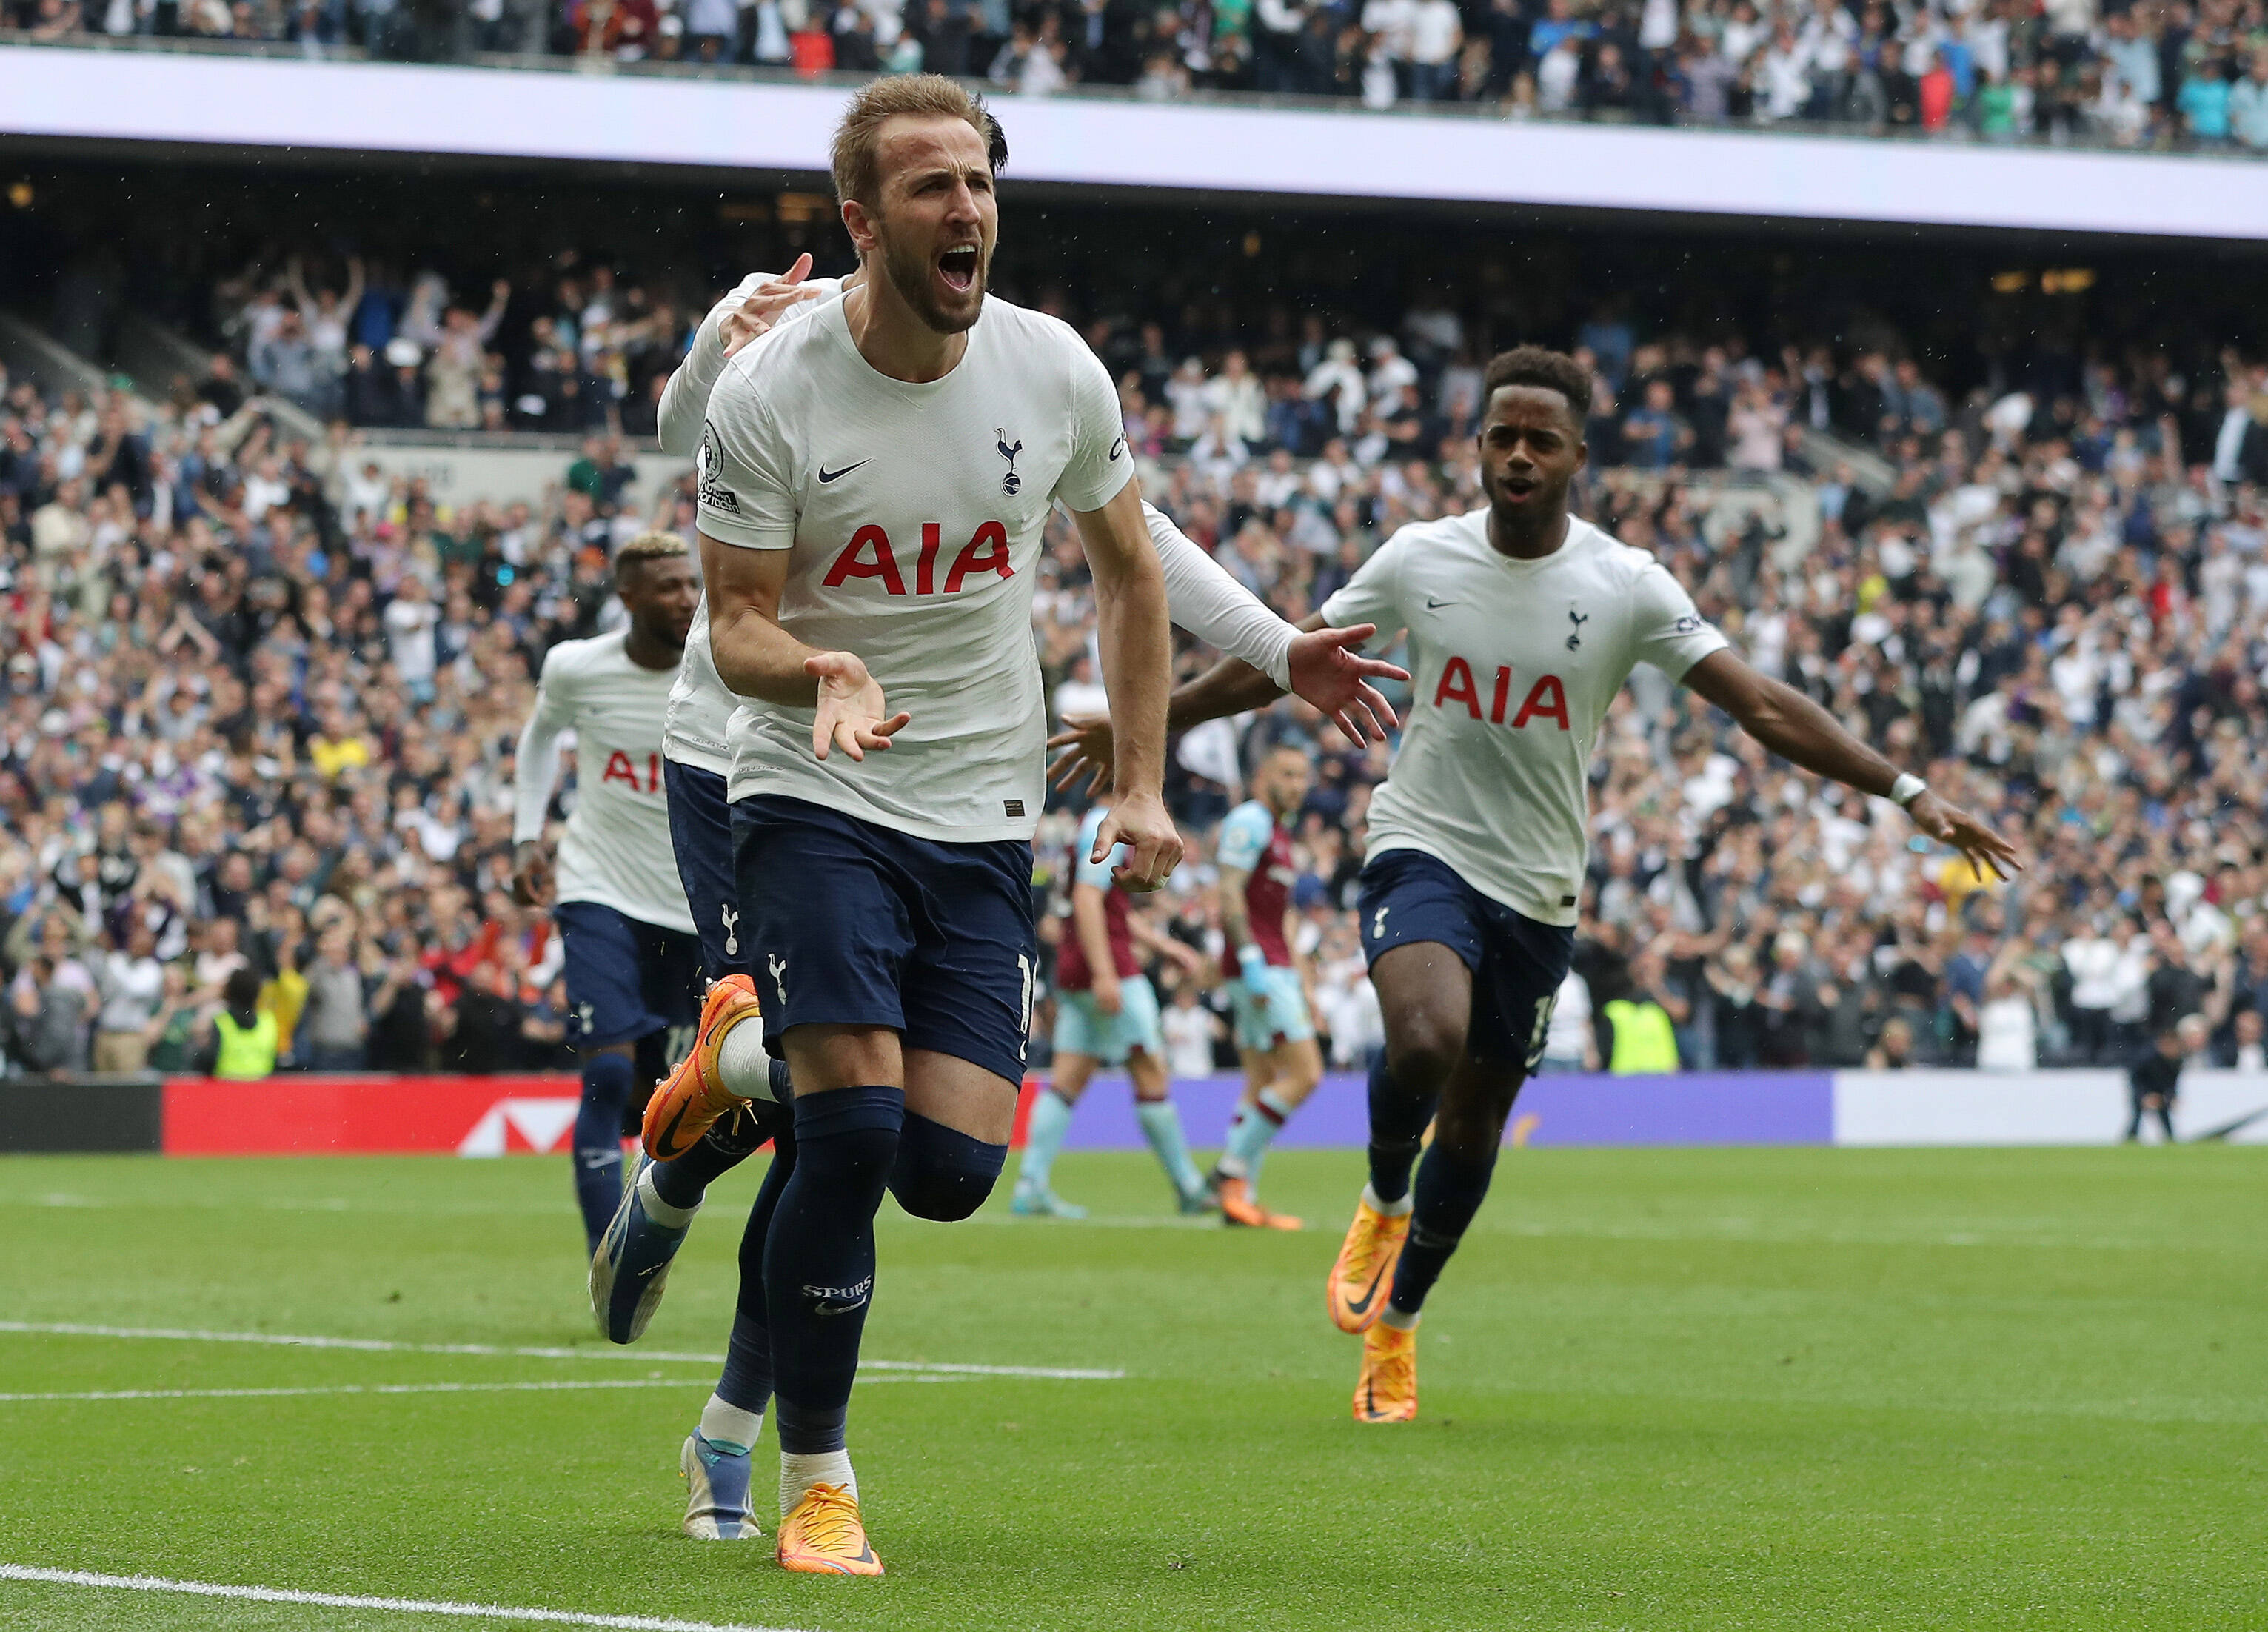 Tottenham recorded a hard-fought win 1-0 win over Burnley in the Premier league on Sunday